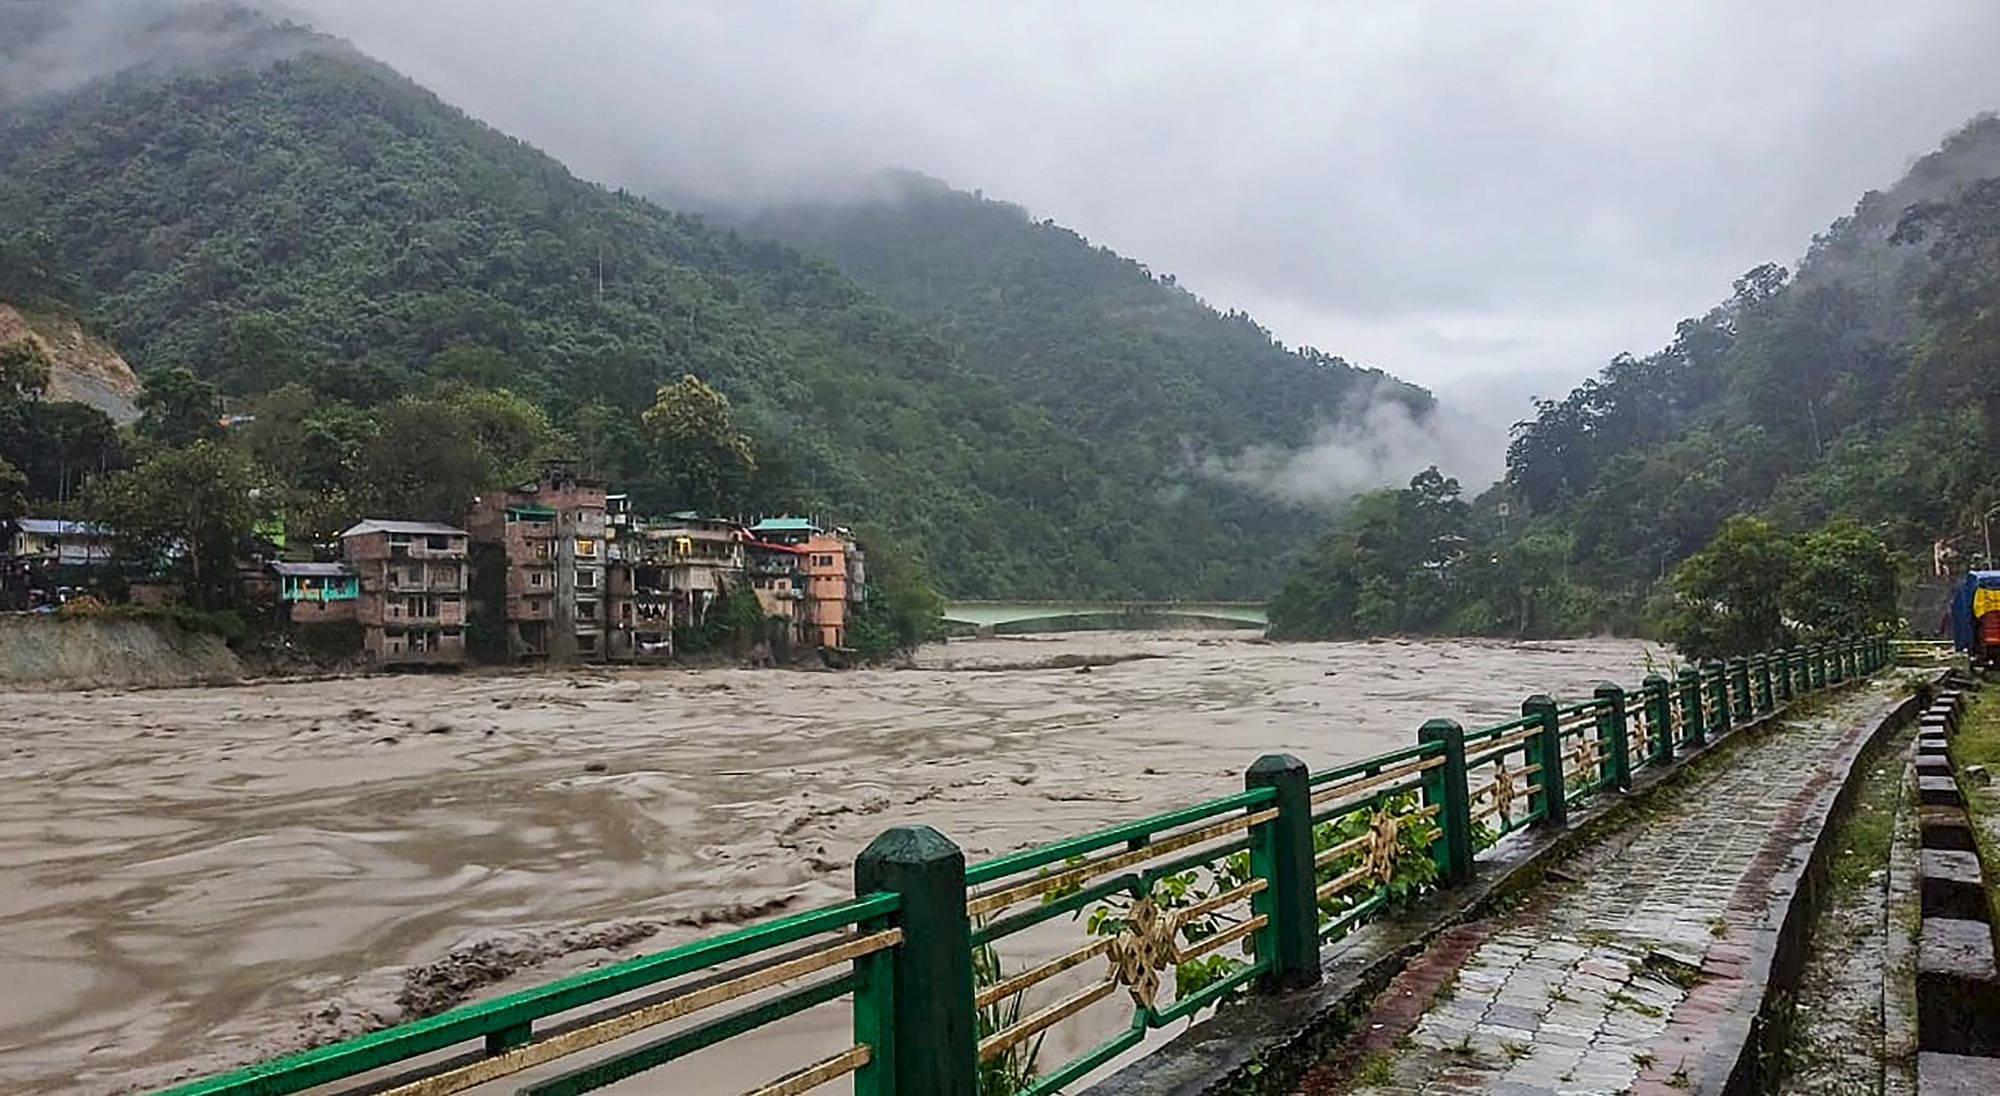 <div class="paragraphs"><p>Flooded Teesta river in north Sikkim on Wednesday, 4 October. A sudden cloud burst over Lhonak Lake in North Sikkim has resulted in a flash flood in the Teesta River in Lachen valley, which was compounded by the release of water from a dam, leading to 23 army personnel being washed away, camps and vehicles being submerged.</p></div>